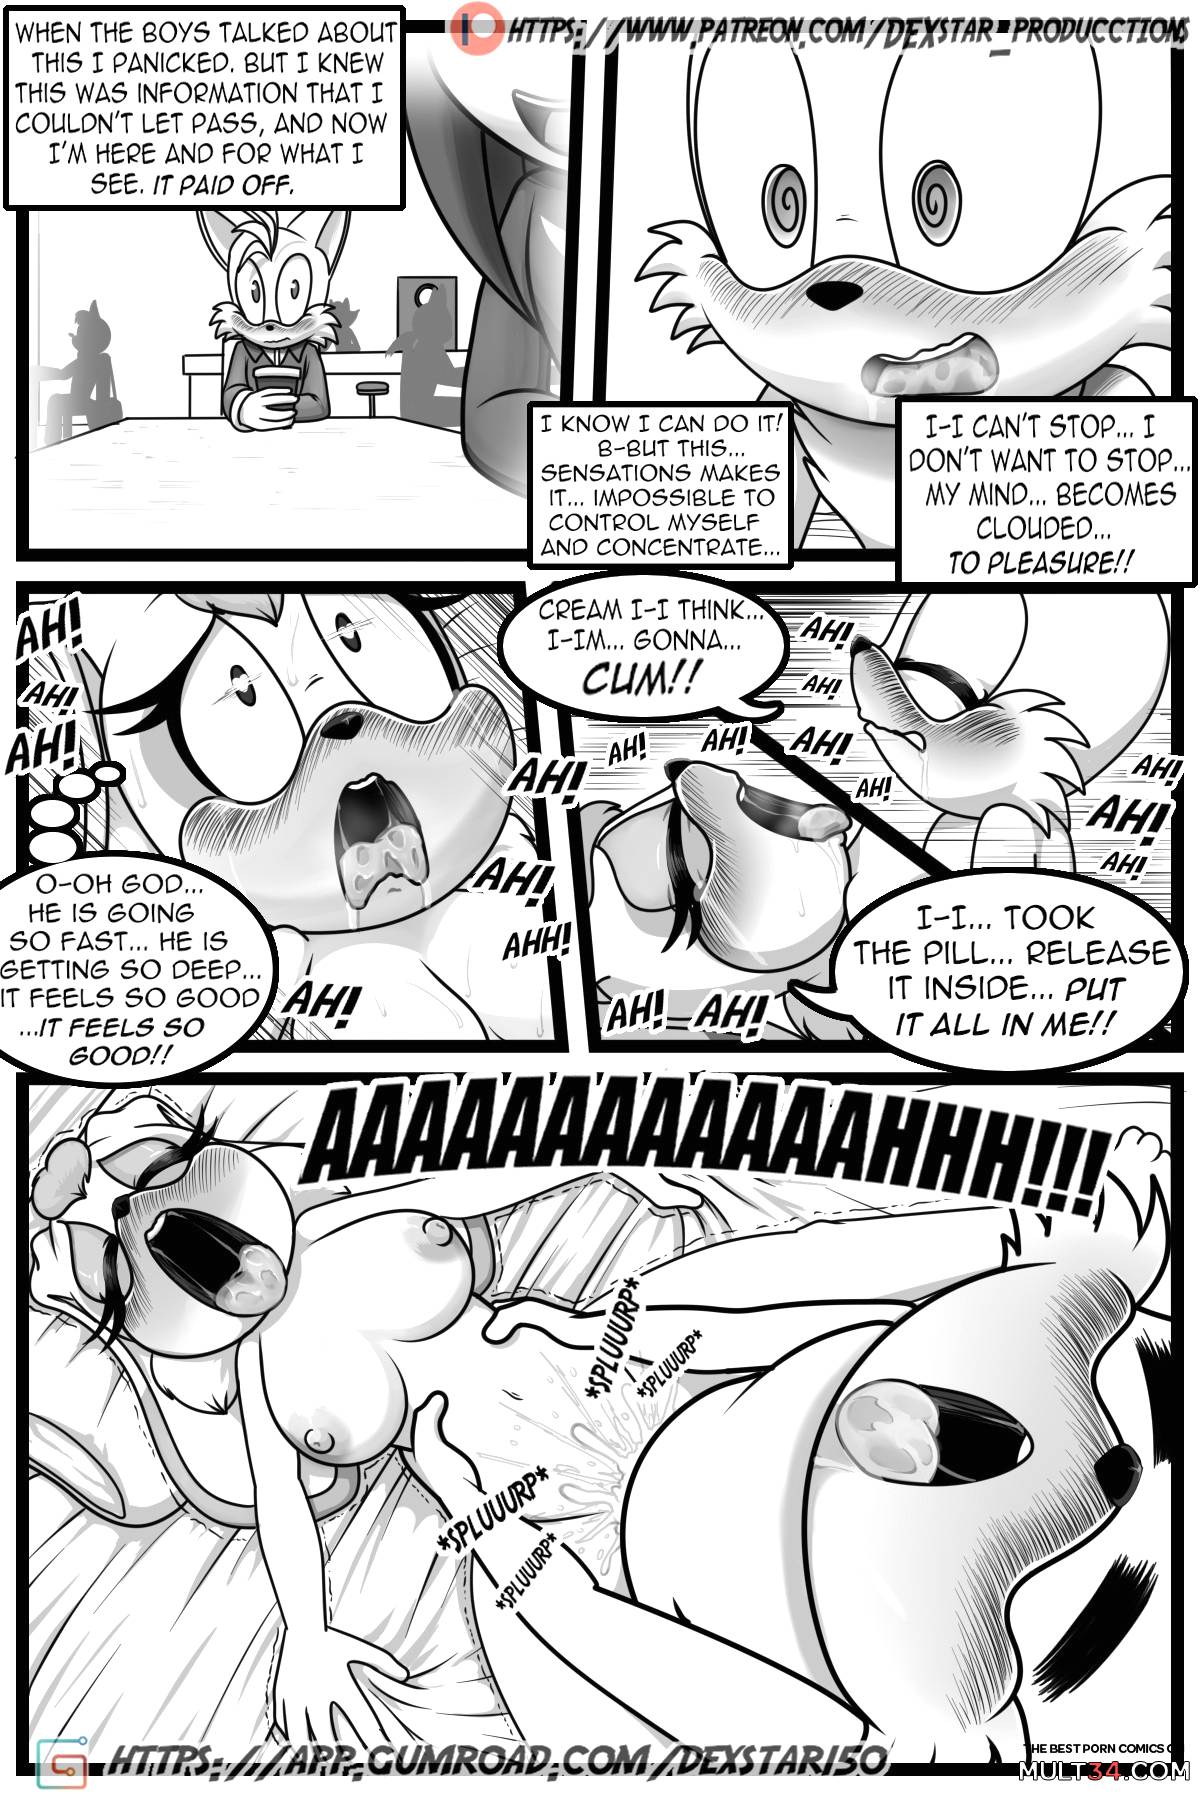 Please Fuck Me: Cream x Tail - Extra Story! page 15